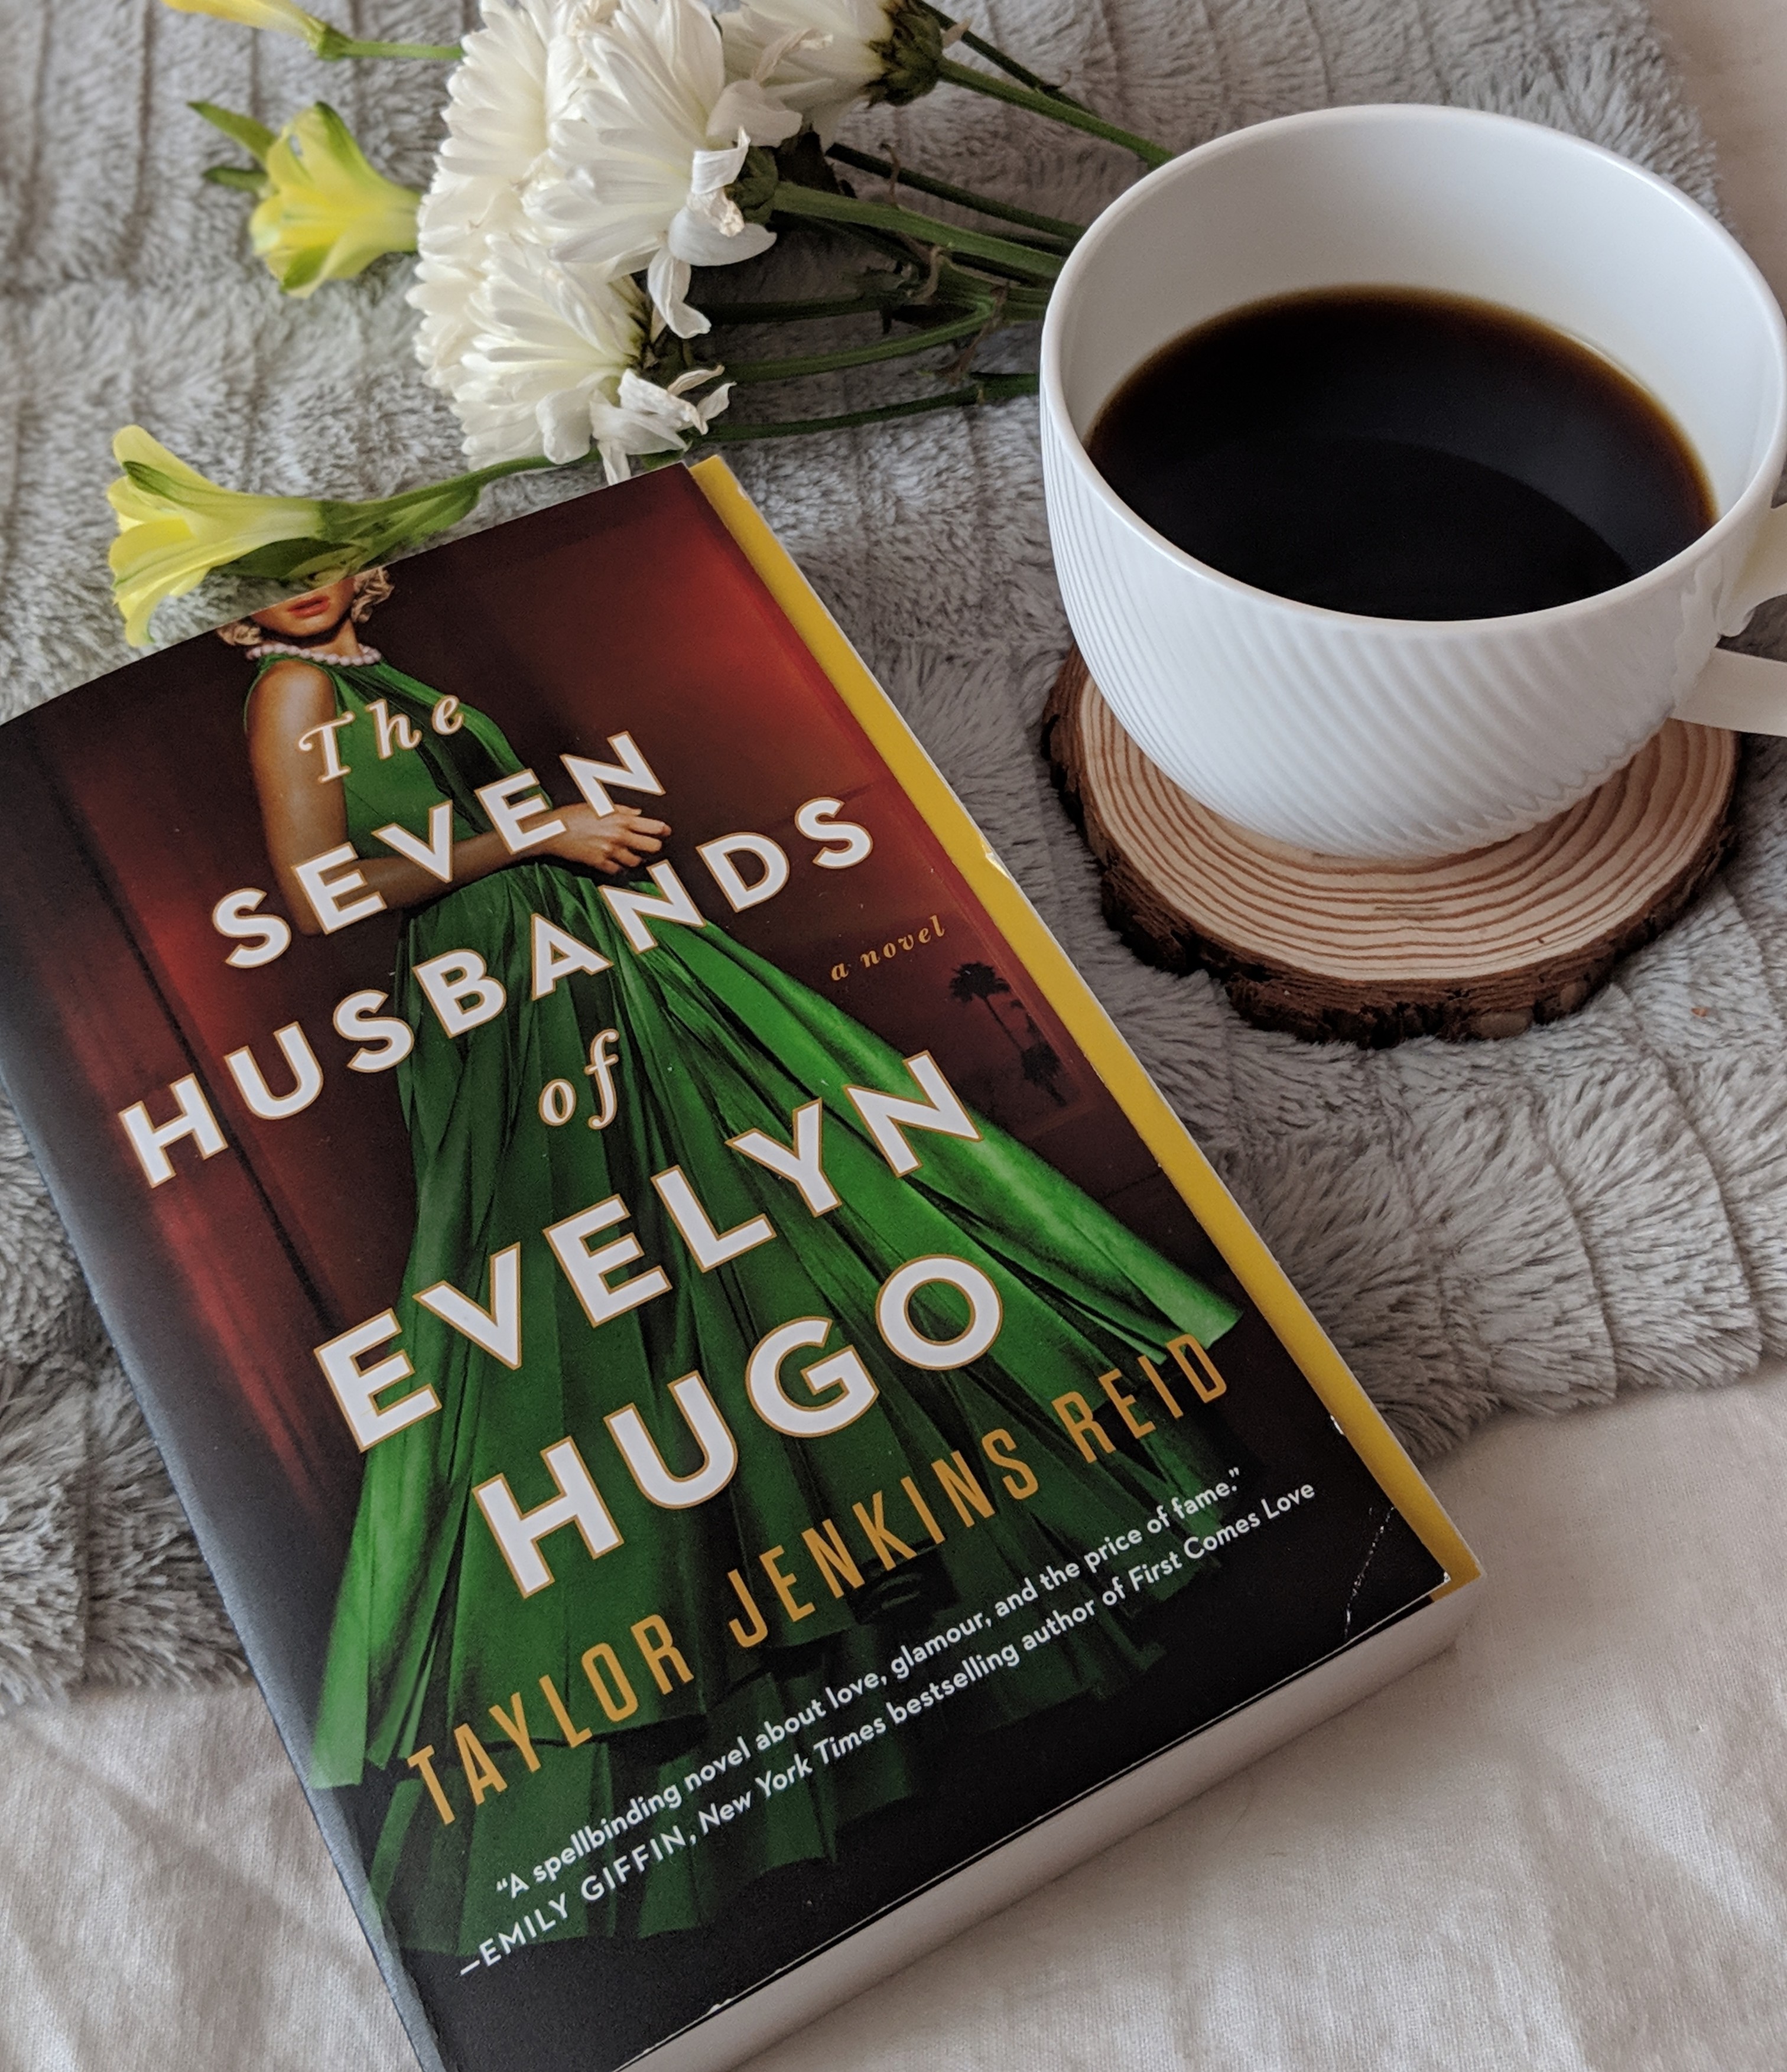 Book Review: The Seven Husbands of Evelyn Hugo by Taylor Jenkins Reid